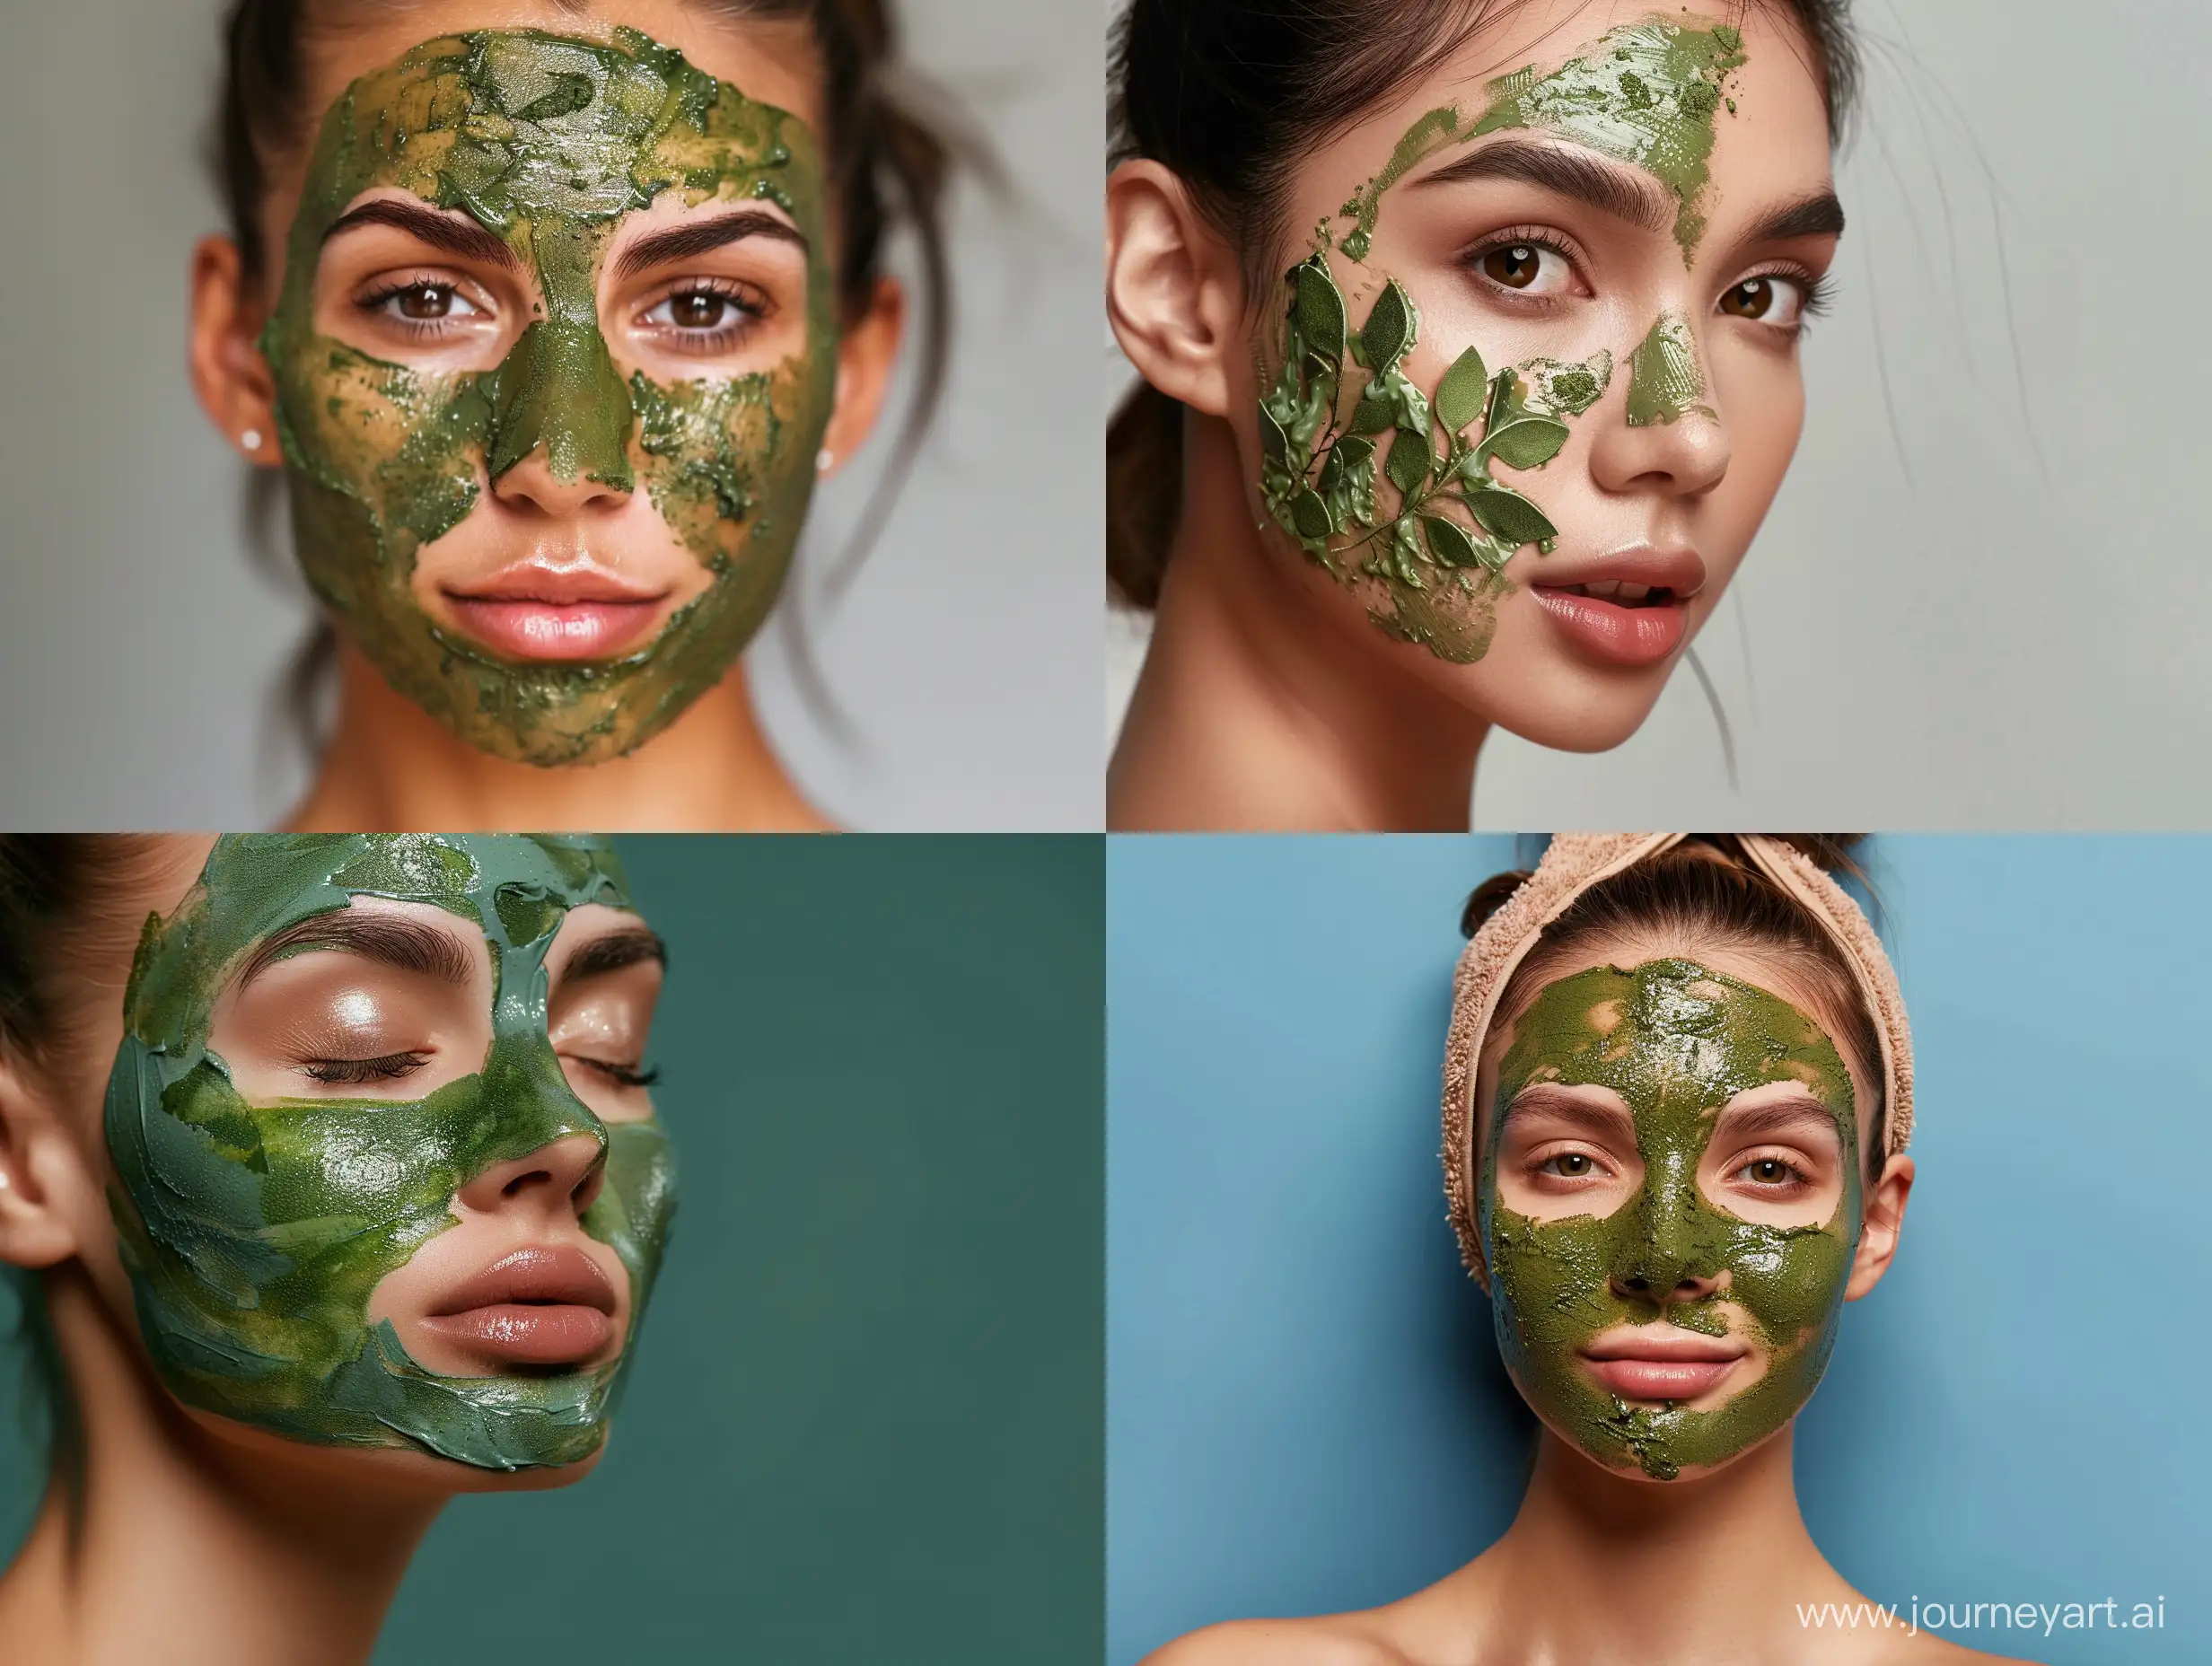 Real photo of a beautiful woman wearing a matcha tea mask on her face.